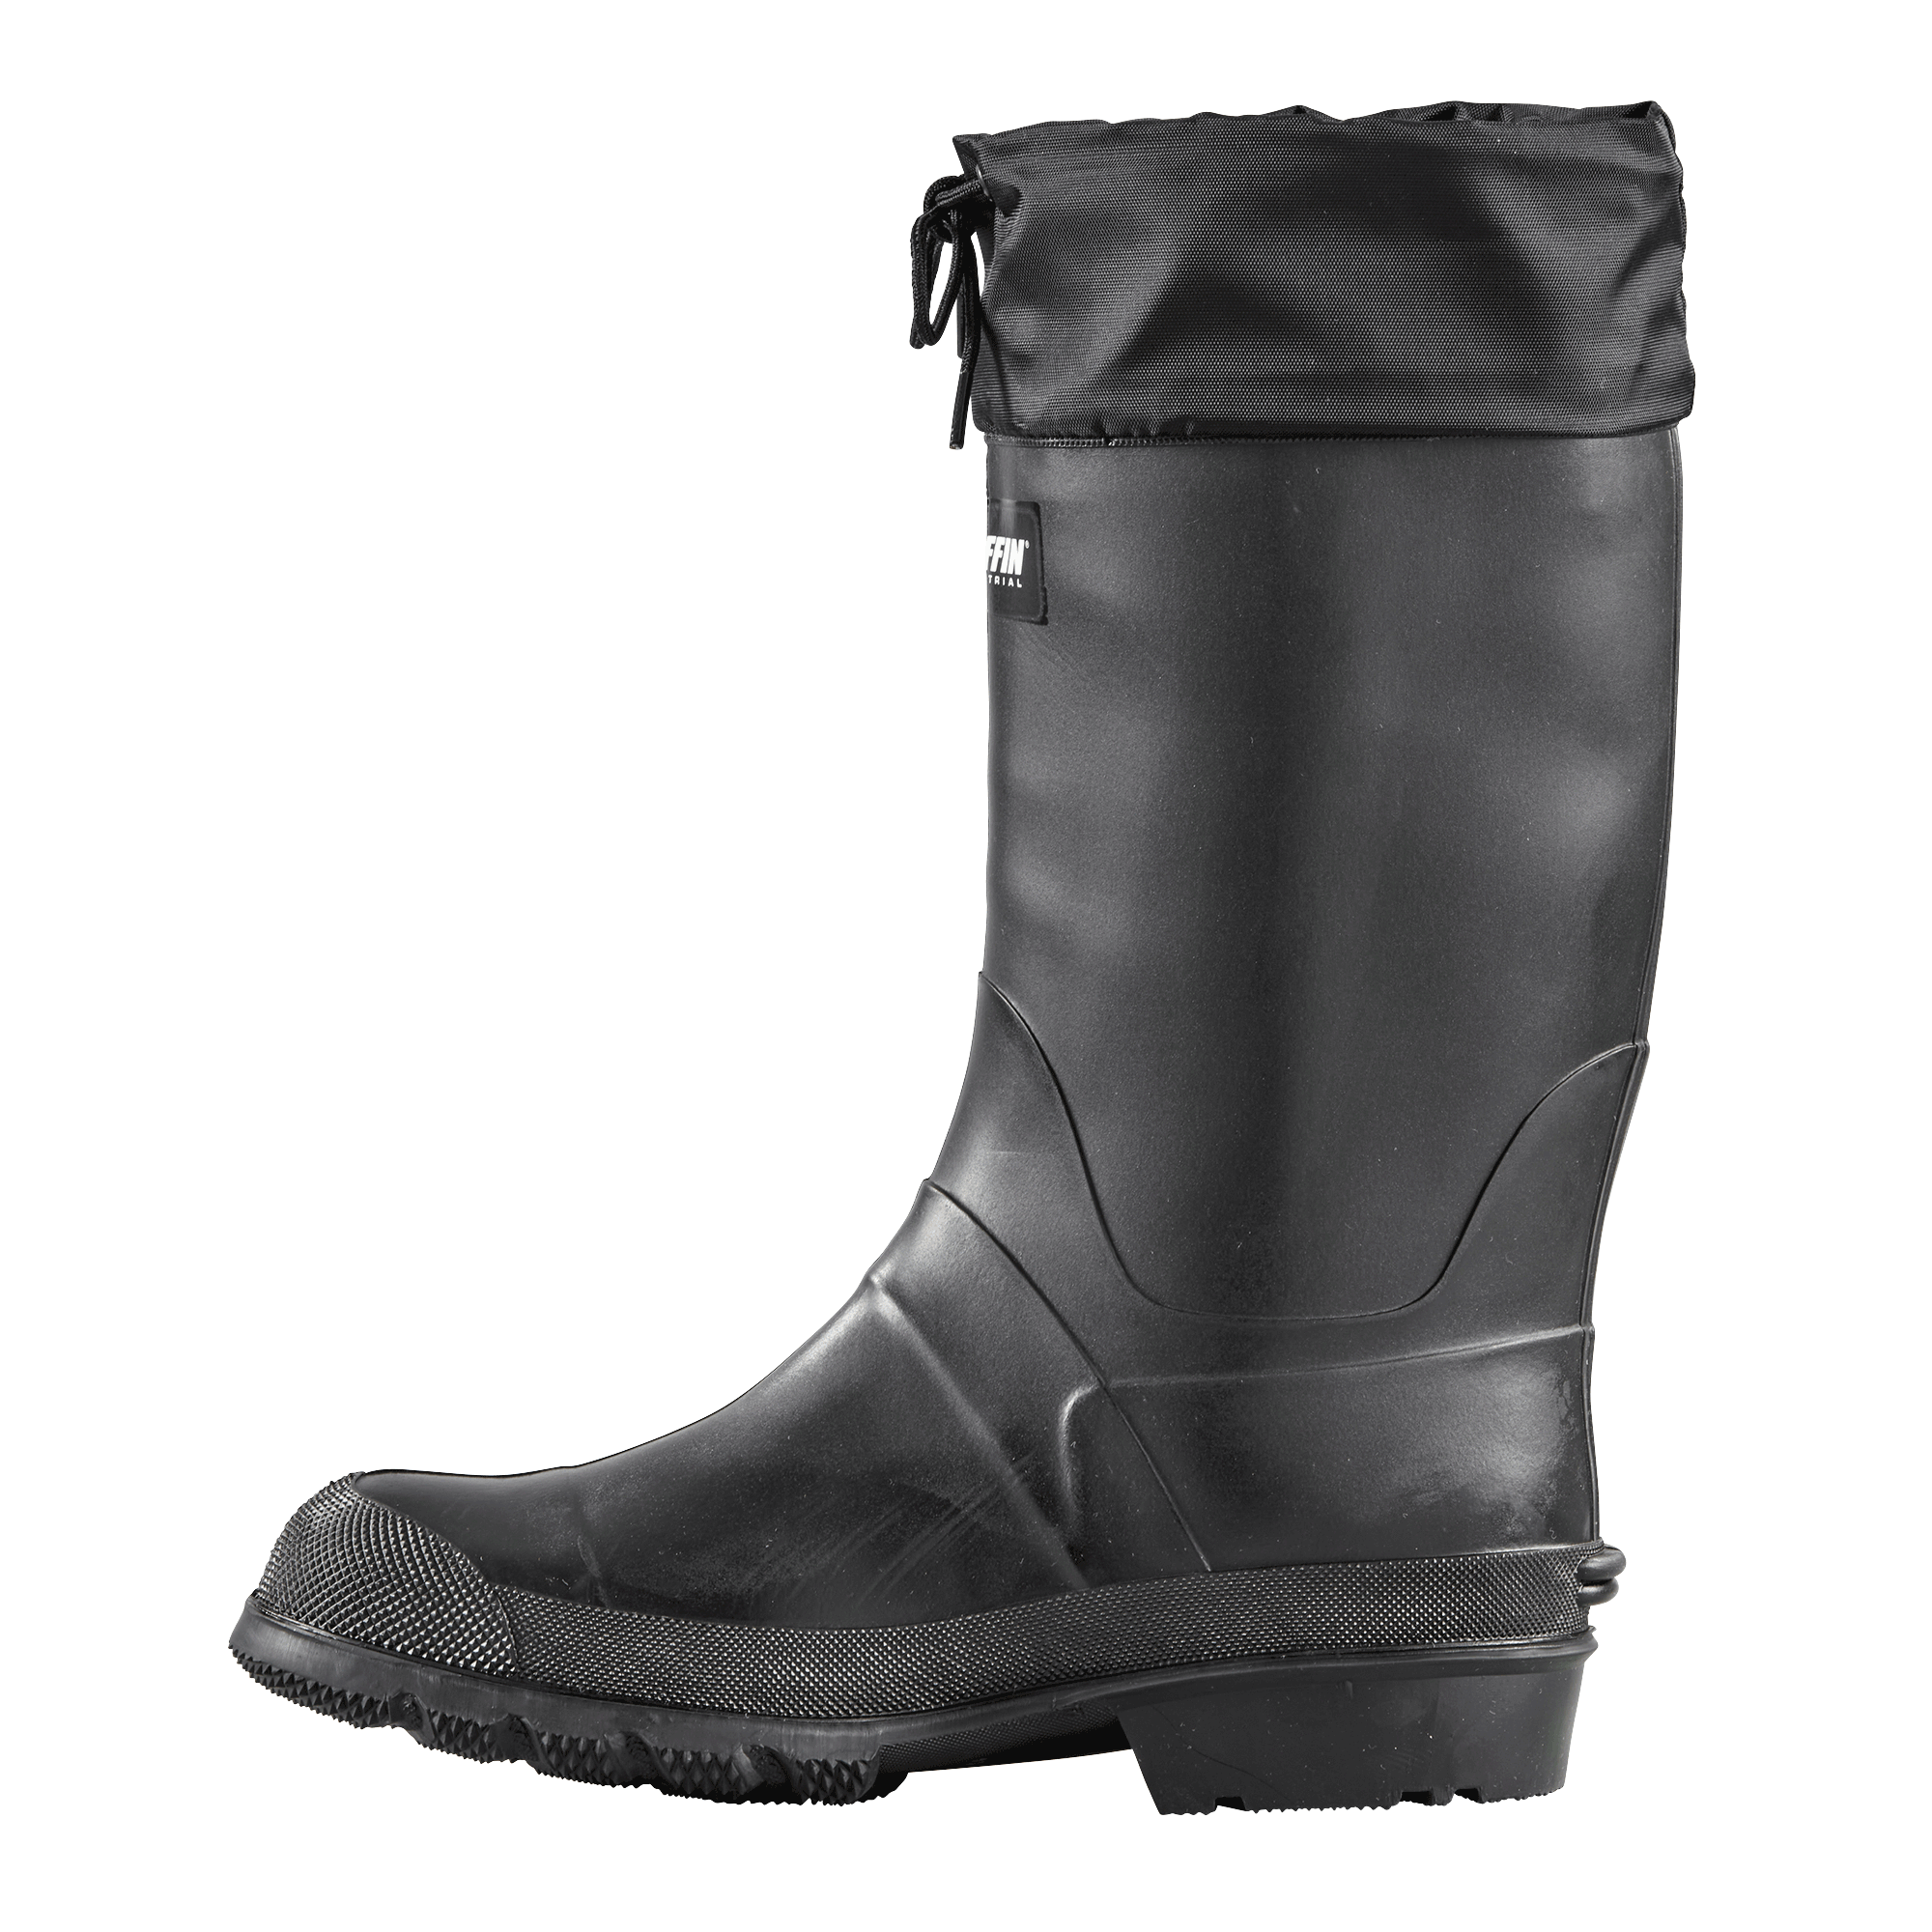 REFINERY (Safety Toe & Plate) | Men's Boot